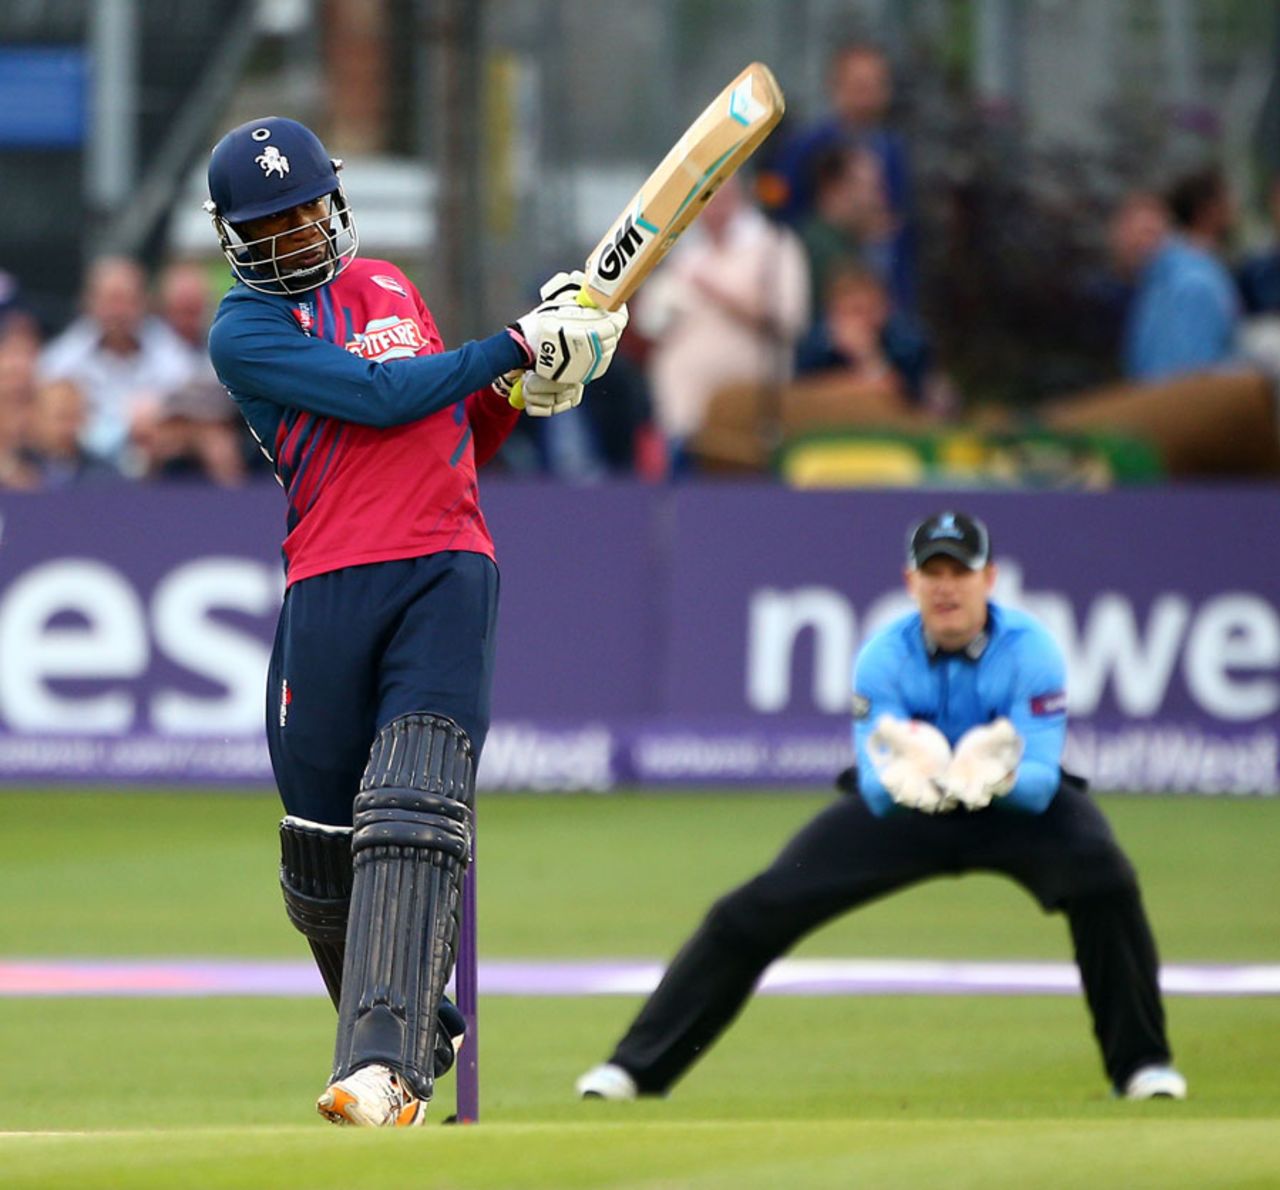 Daniel Bell-Drummond was the only Kent top-order batsman to get going, Sussex v Kent, NatWest T20 Blast, Hove, July 11, 2014